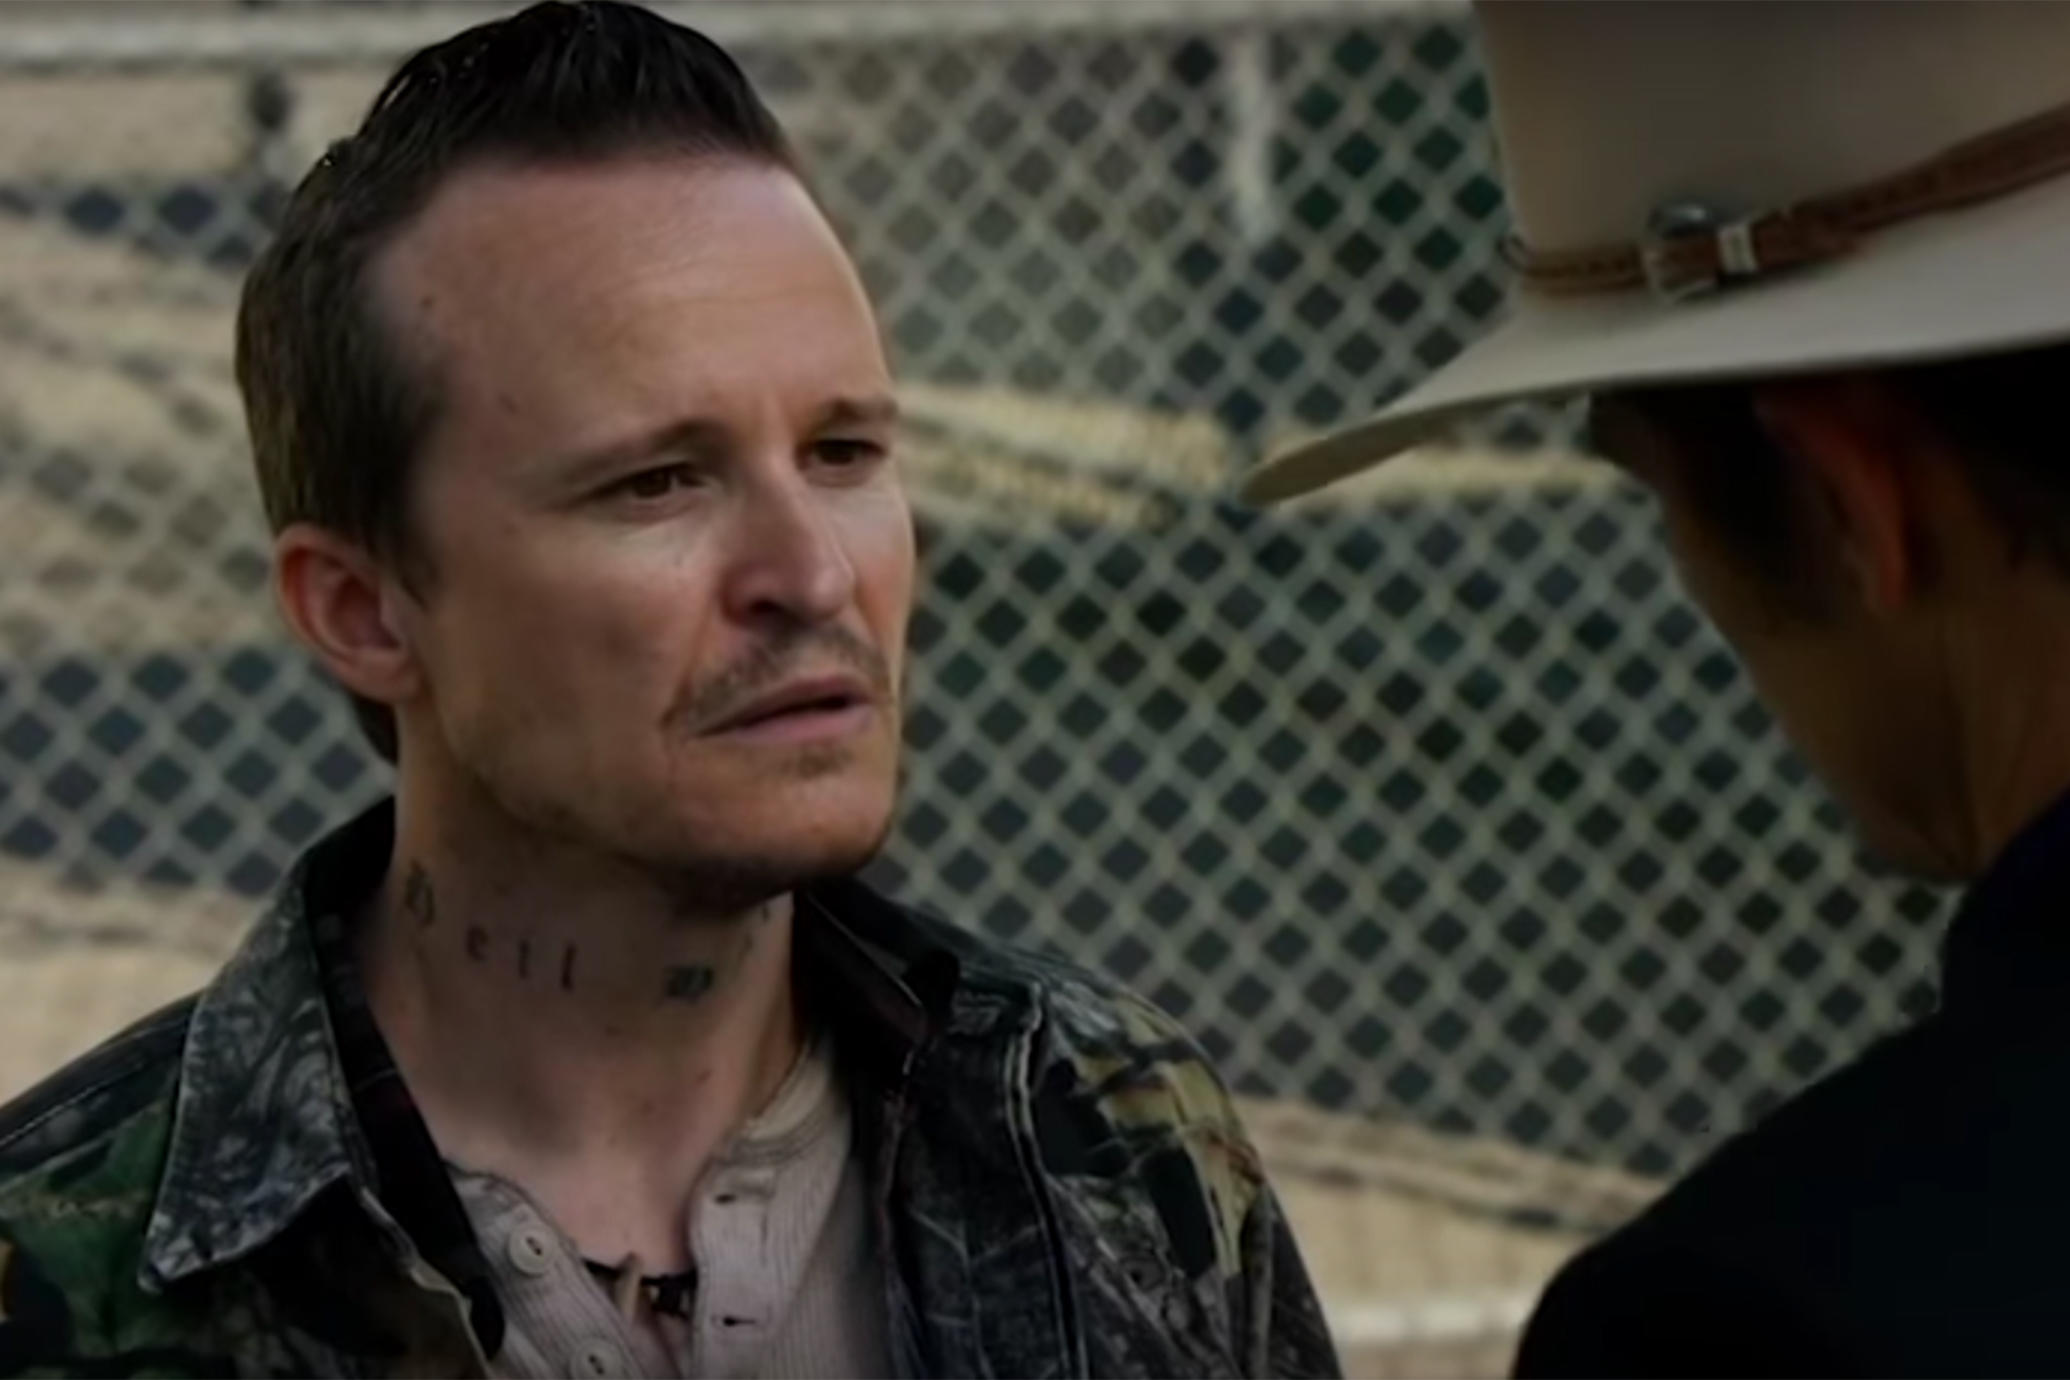 How Justified’s Damon Herriman Landed The Role Of Charles Manson In Both Mindhunter And Tarantino’s Once Upon A Time In Hollywood